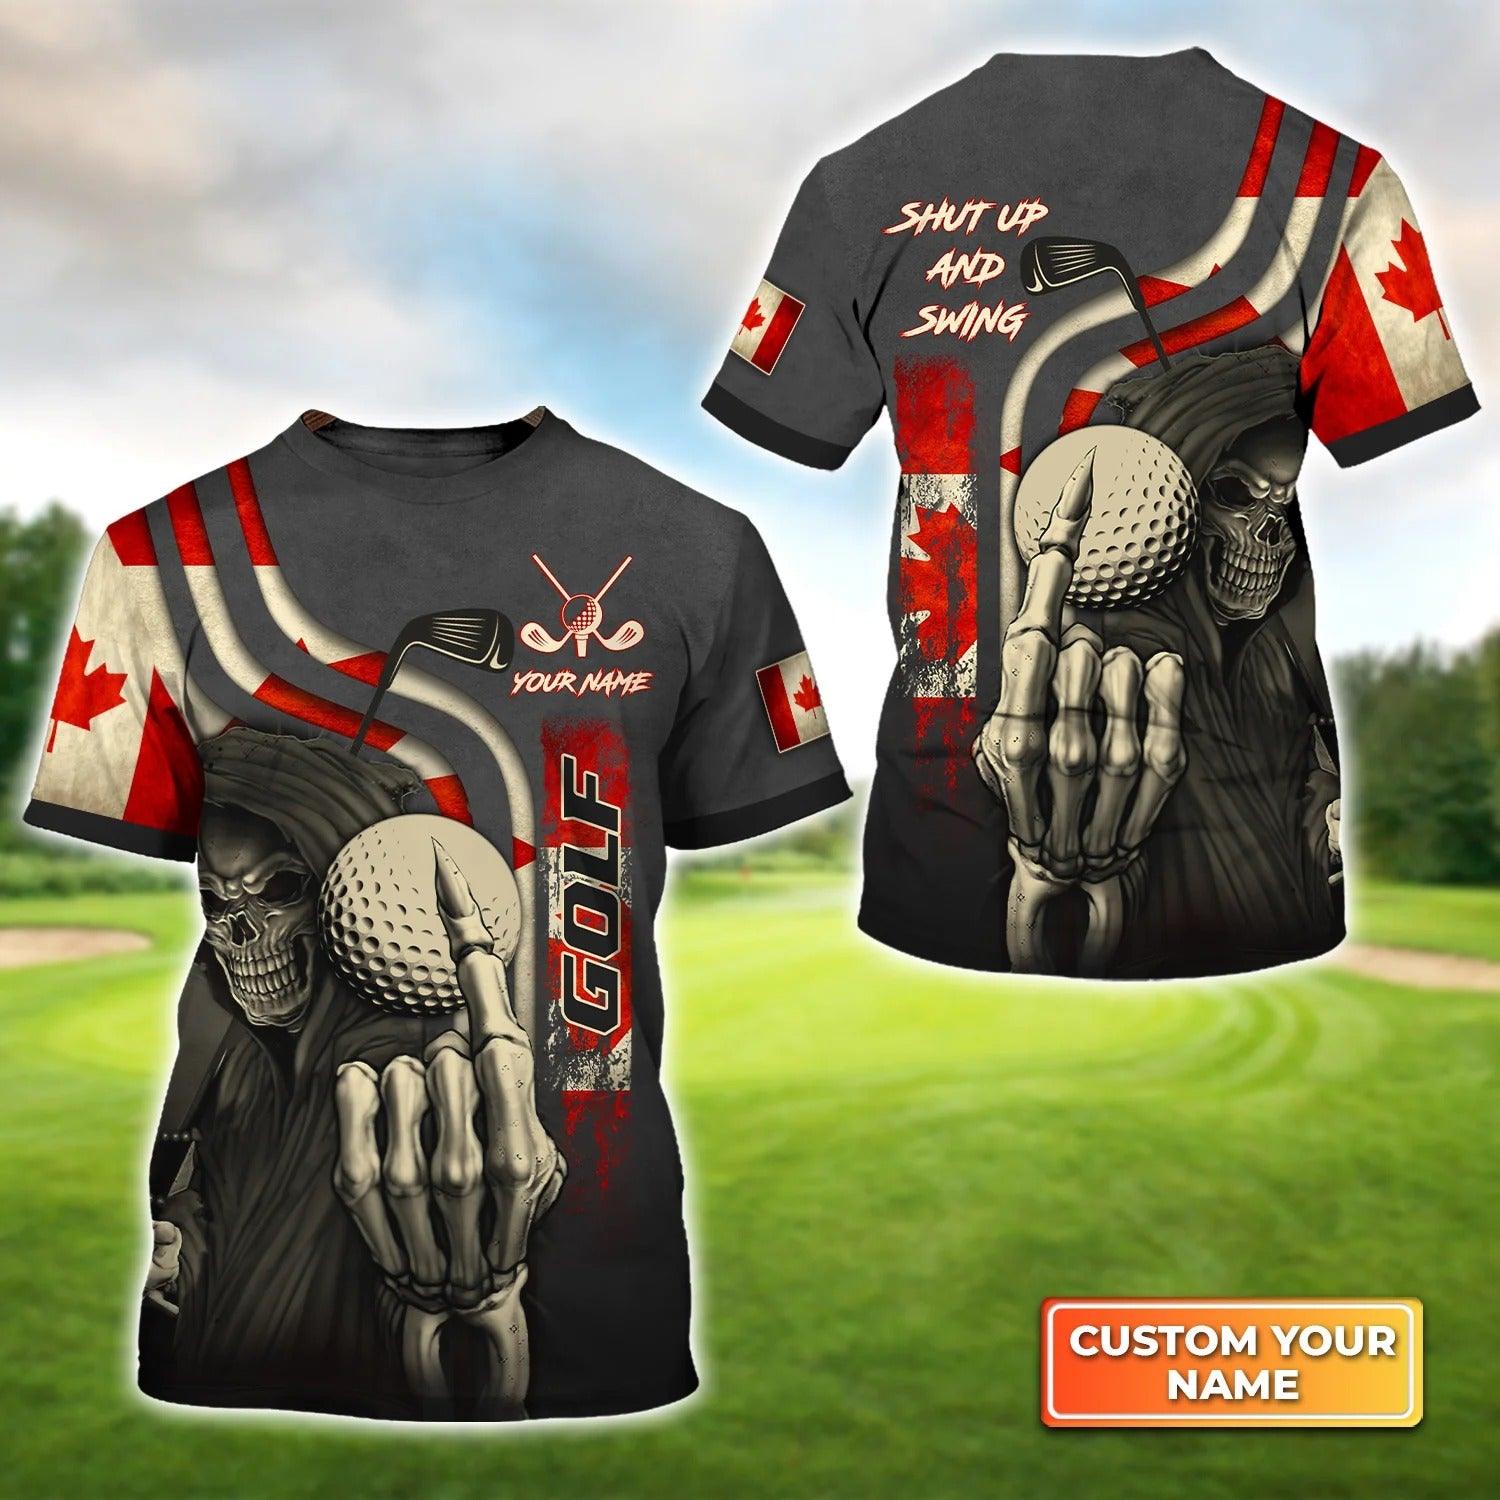 Customized Golf T Shirt, Personalized Name Canada Flag Skull Golf Shut Up And Swing T Shirt For Golf Lovers - Perfect Gift For Golfer, Friend, Family - Amzanimalsgift